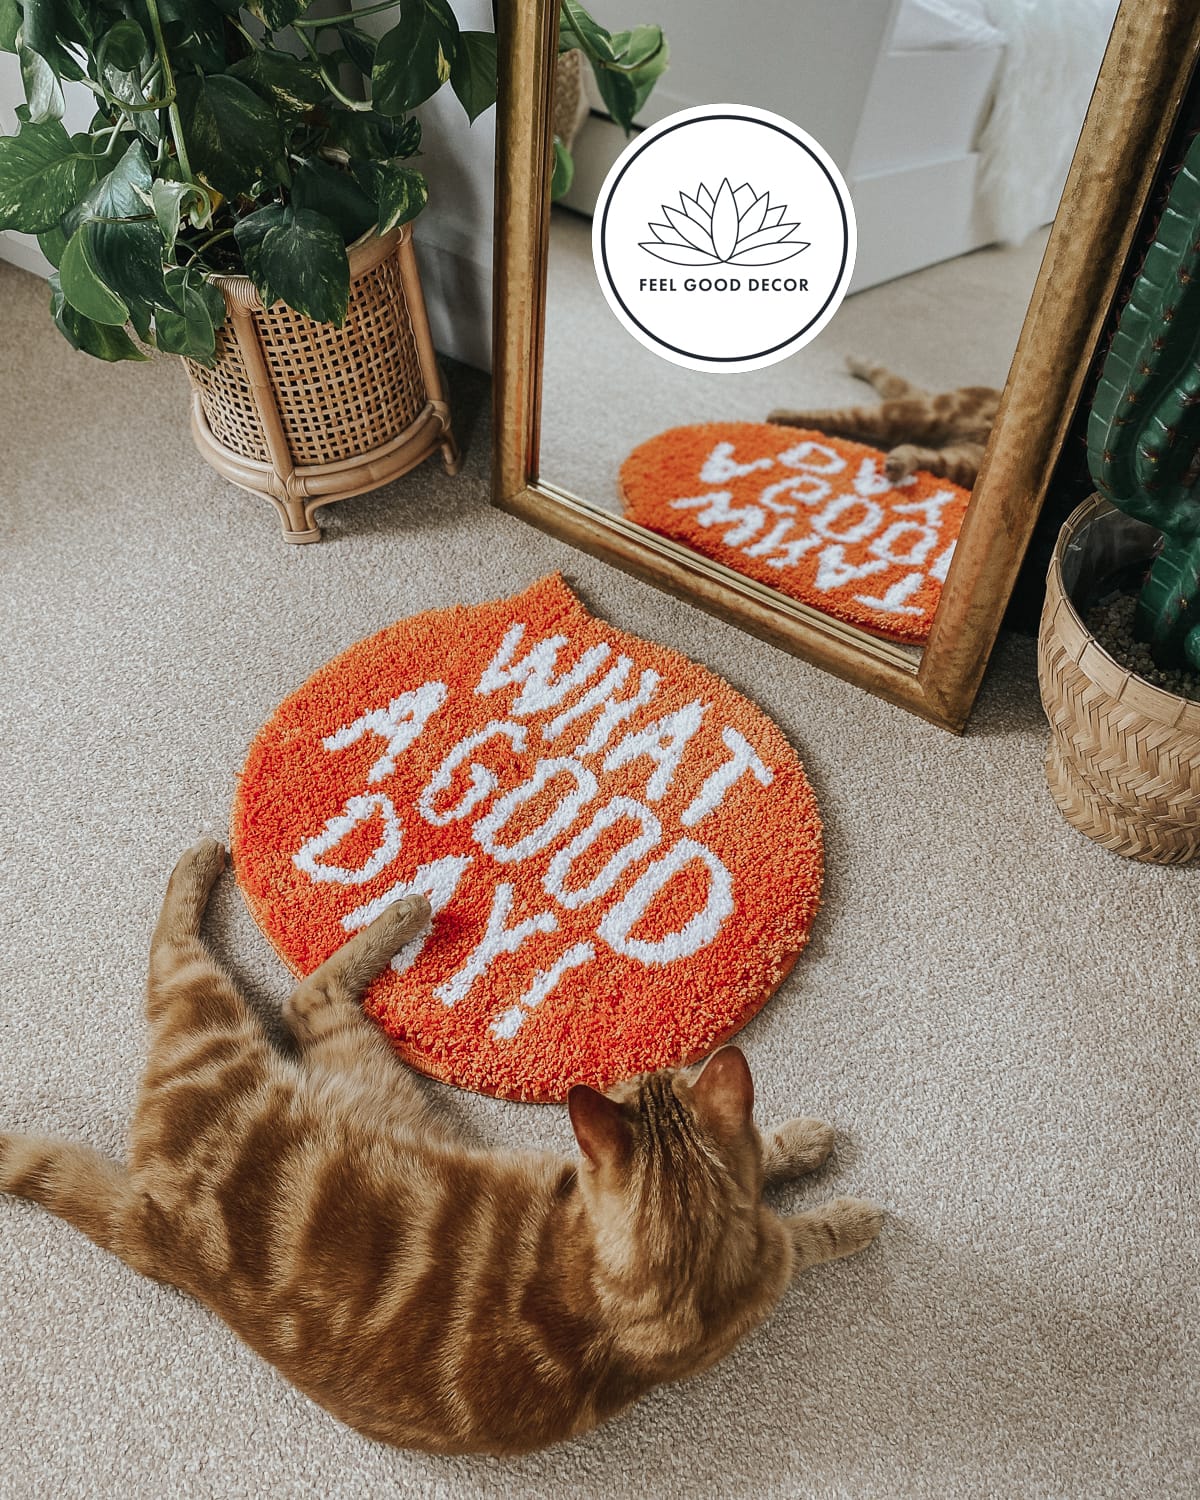 https://feelgooddecor.com/wp-content/uploads/2021/10/What-A-Good-Day-Positive-Quote-Decorative-Orange-Accent-Rug-Bath-Mat-Feel-Good-Decor7.jpg